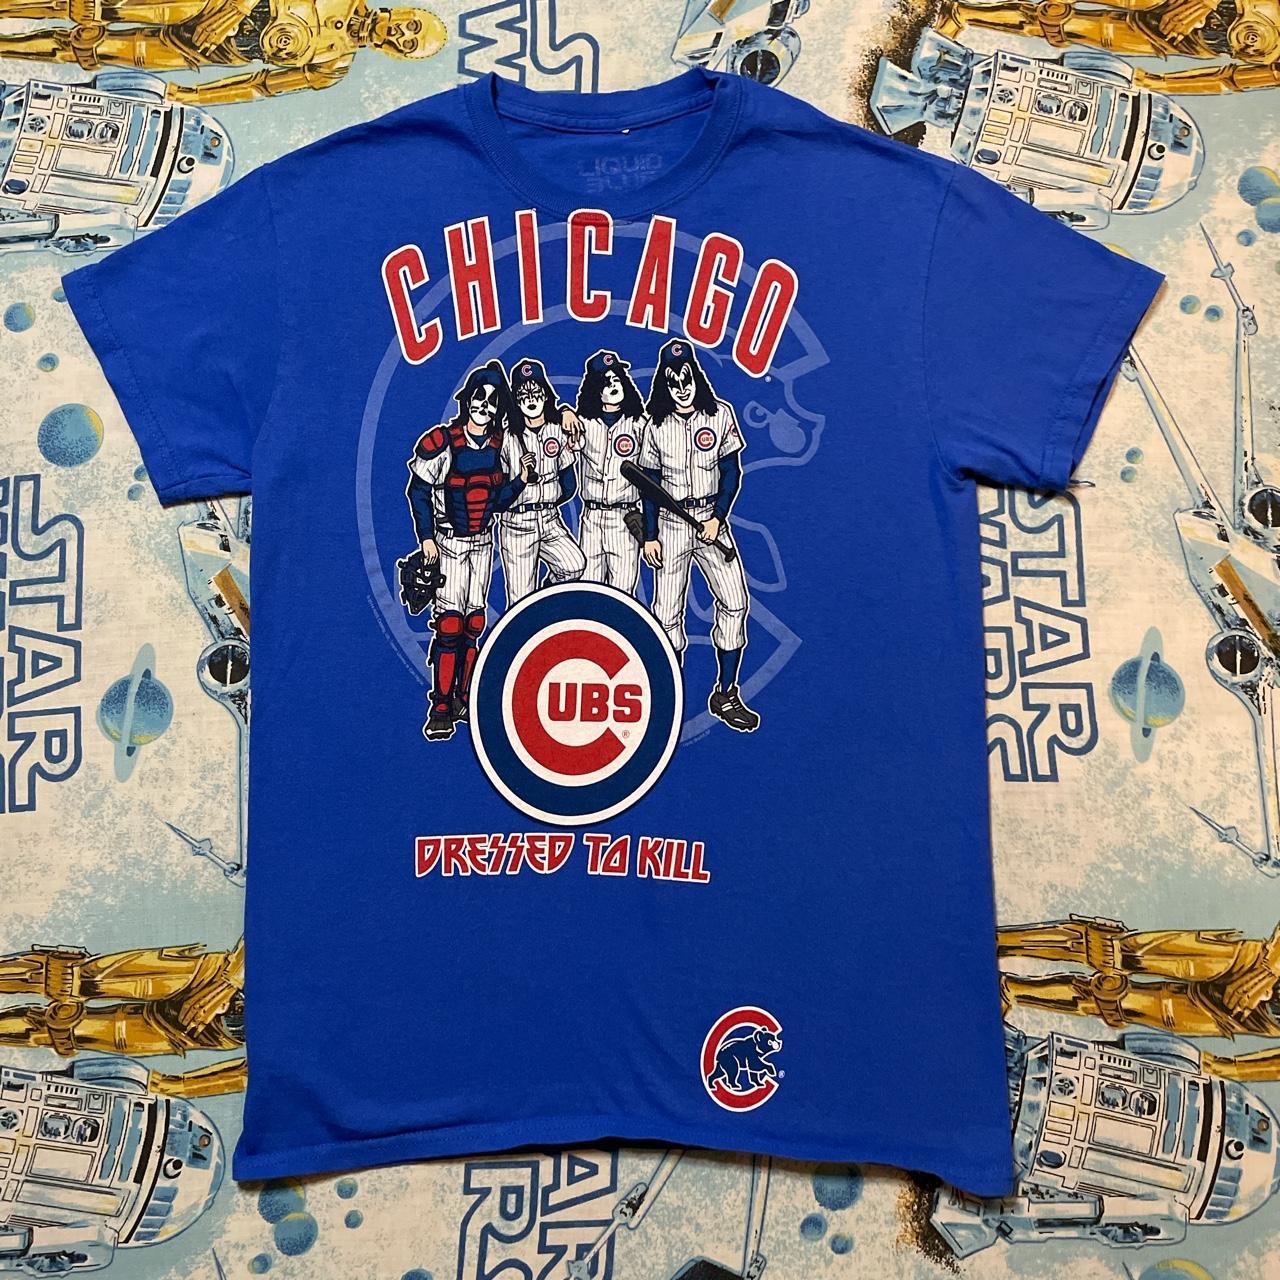 Chicago Cubs Dressed to Kill Blue T-Shirt